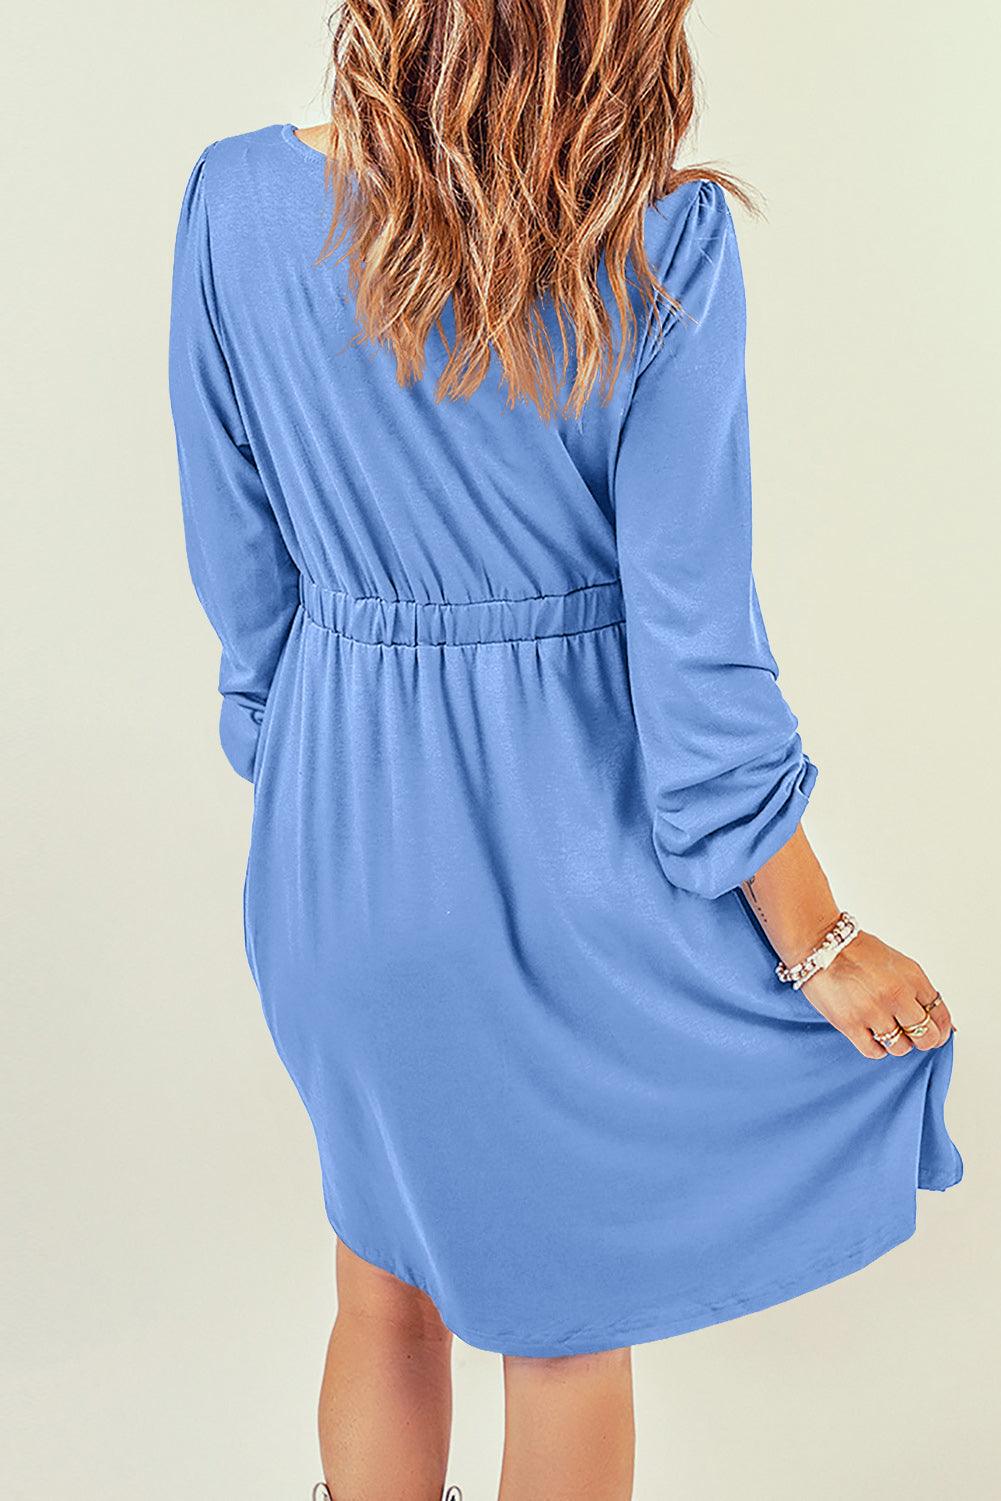 Button Down Long Sleeve Dress with Pockets - Flyclothing LLC